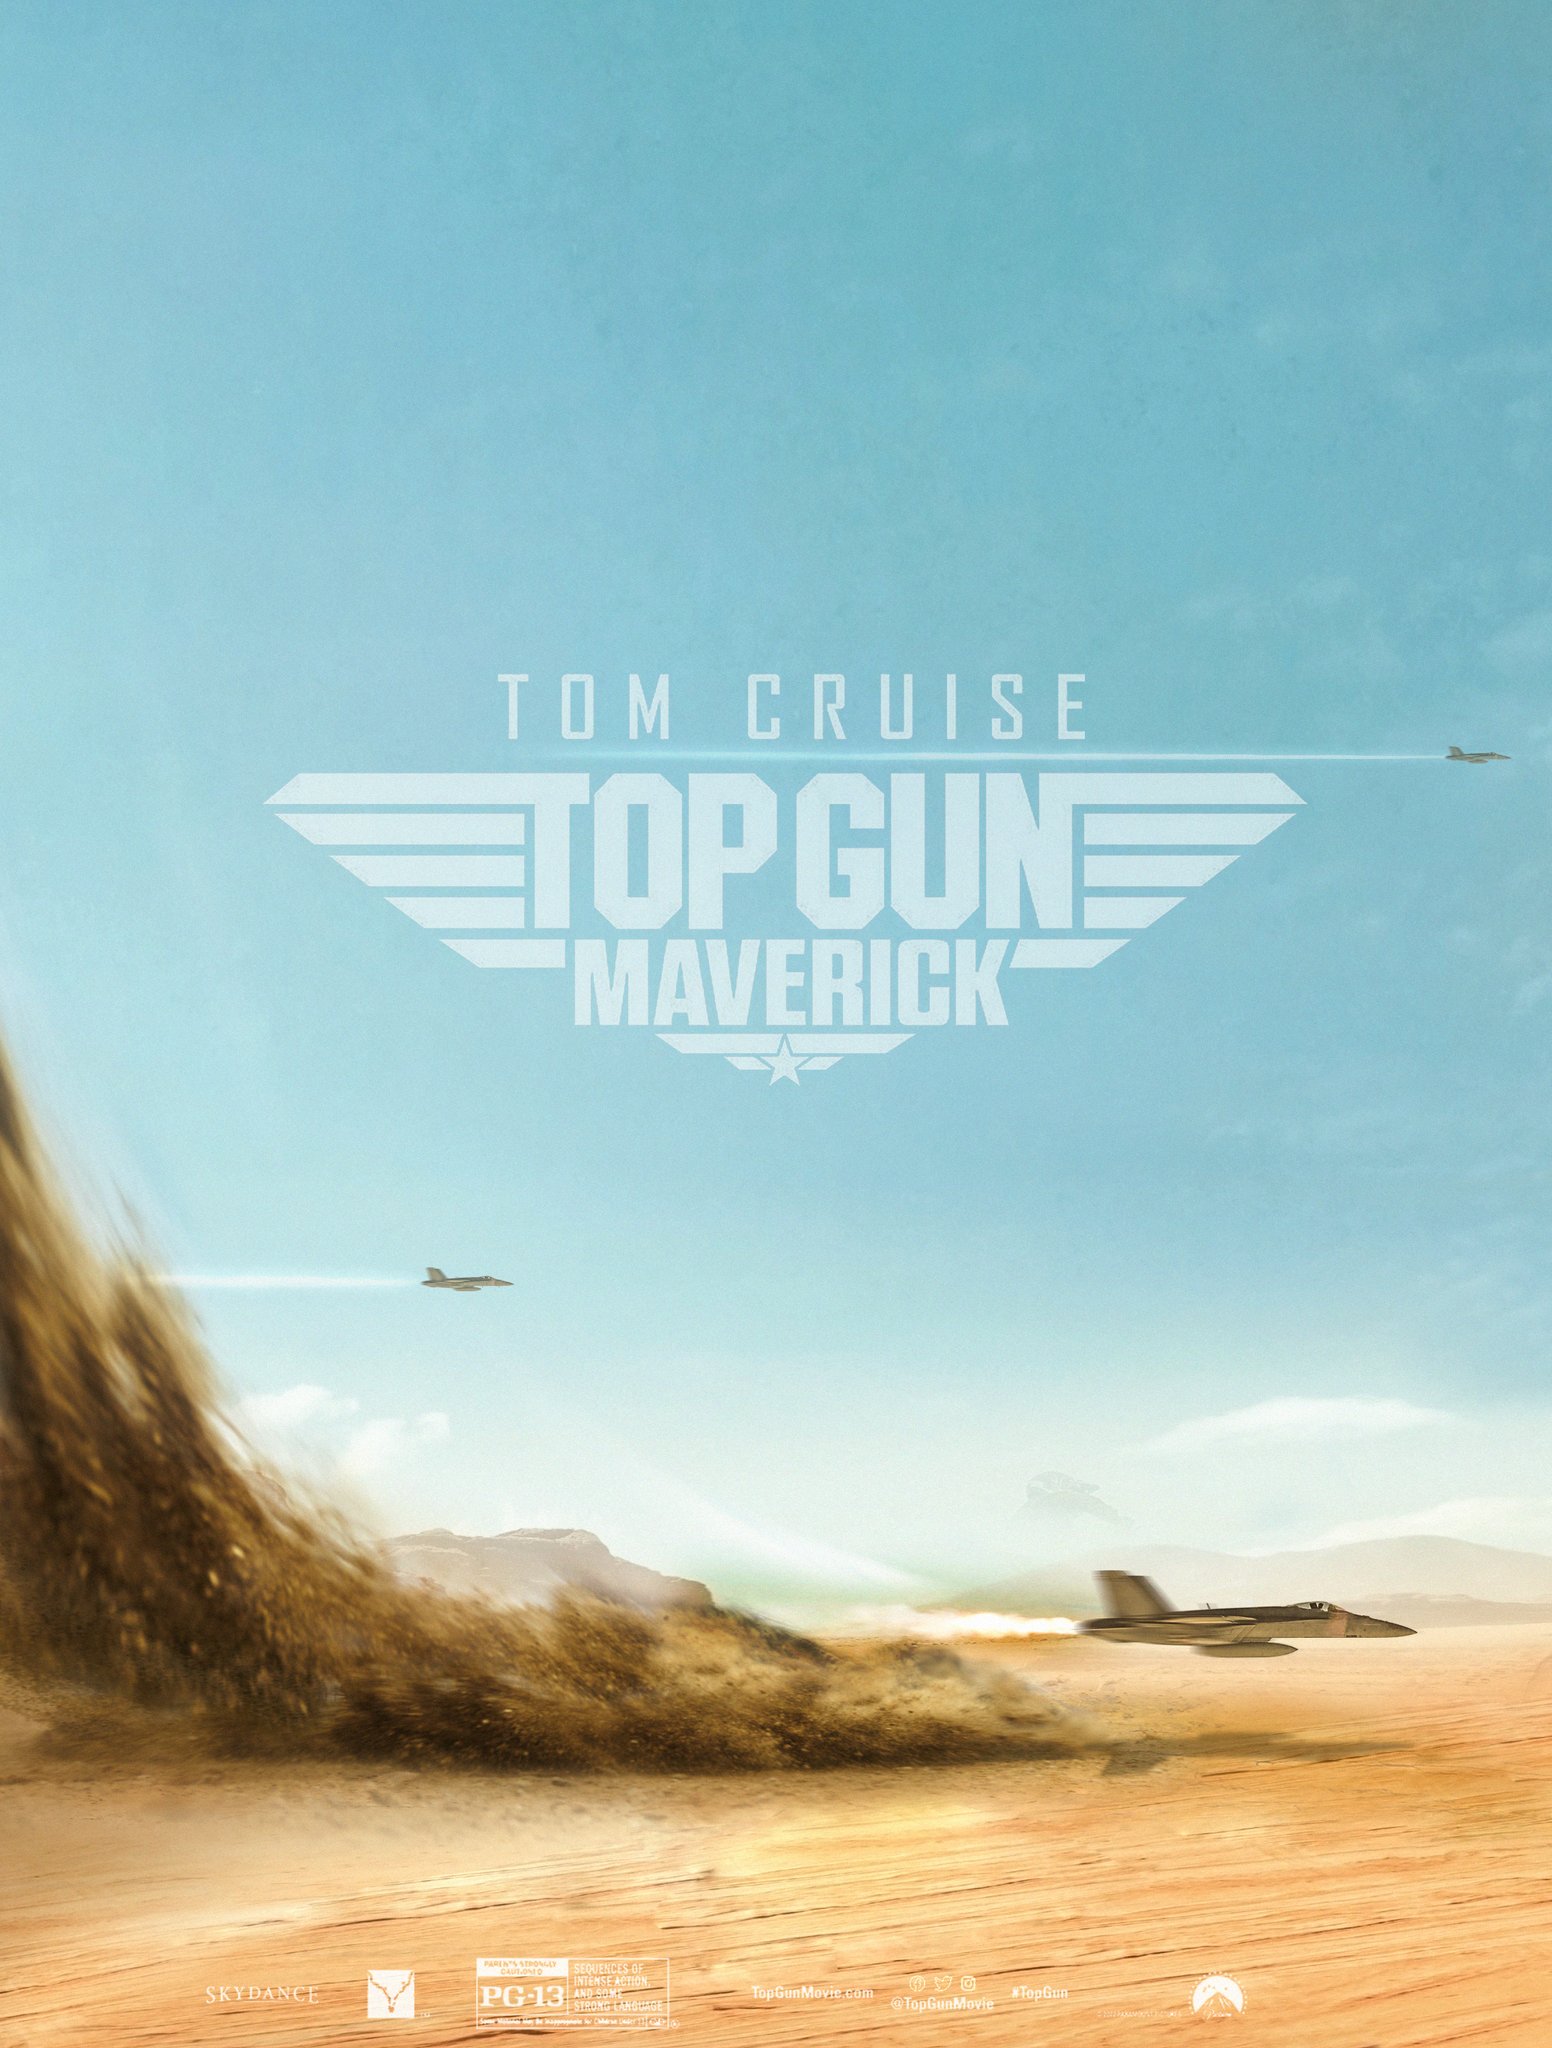 Gundersons  Bring back that lovin feelin  Movie night while drawing  this beautiful classic Looking forward to watch the new Top Gun Maverick  in November   Facebook